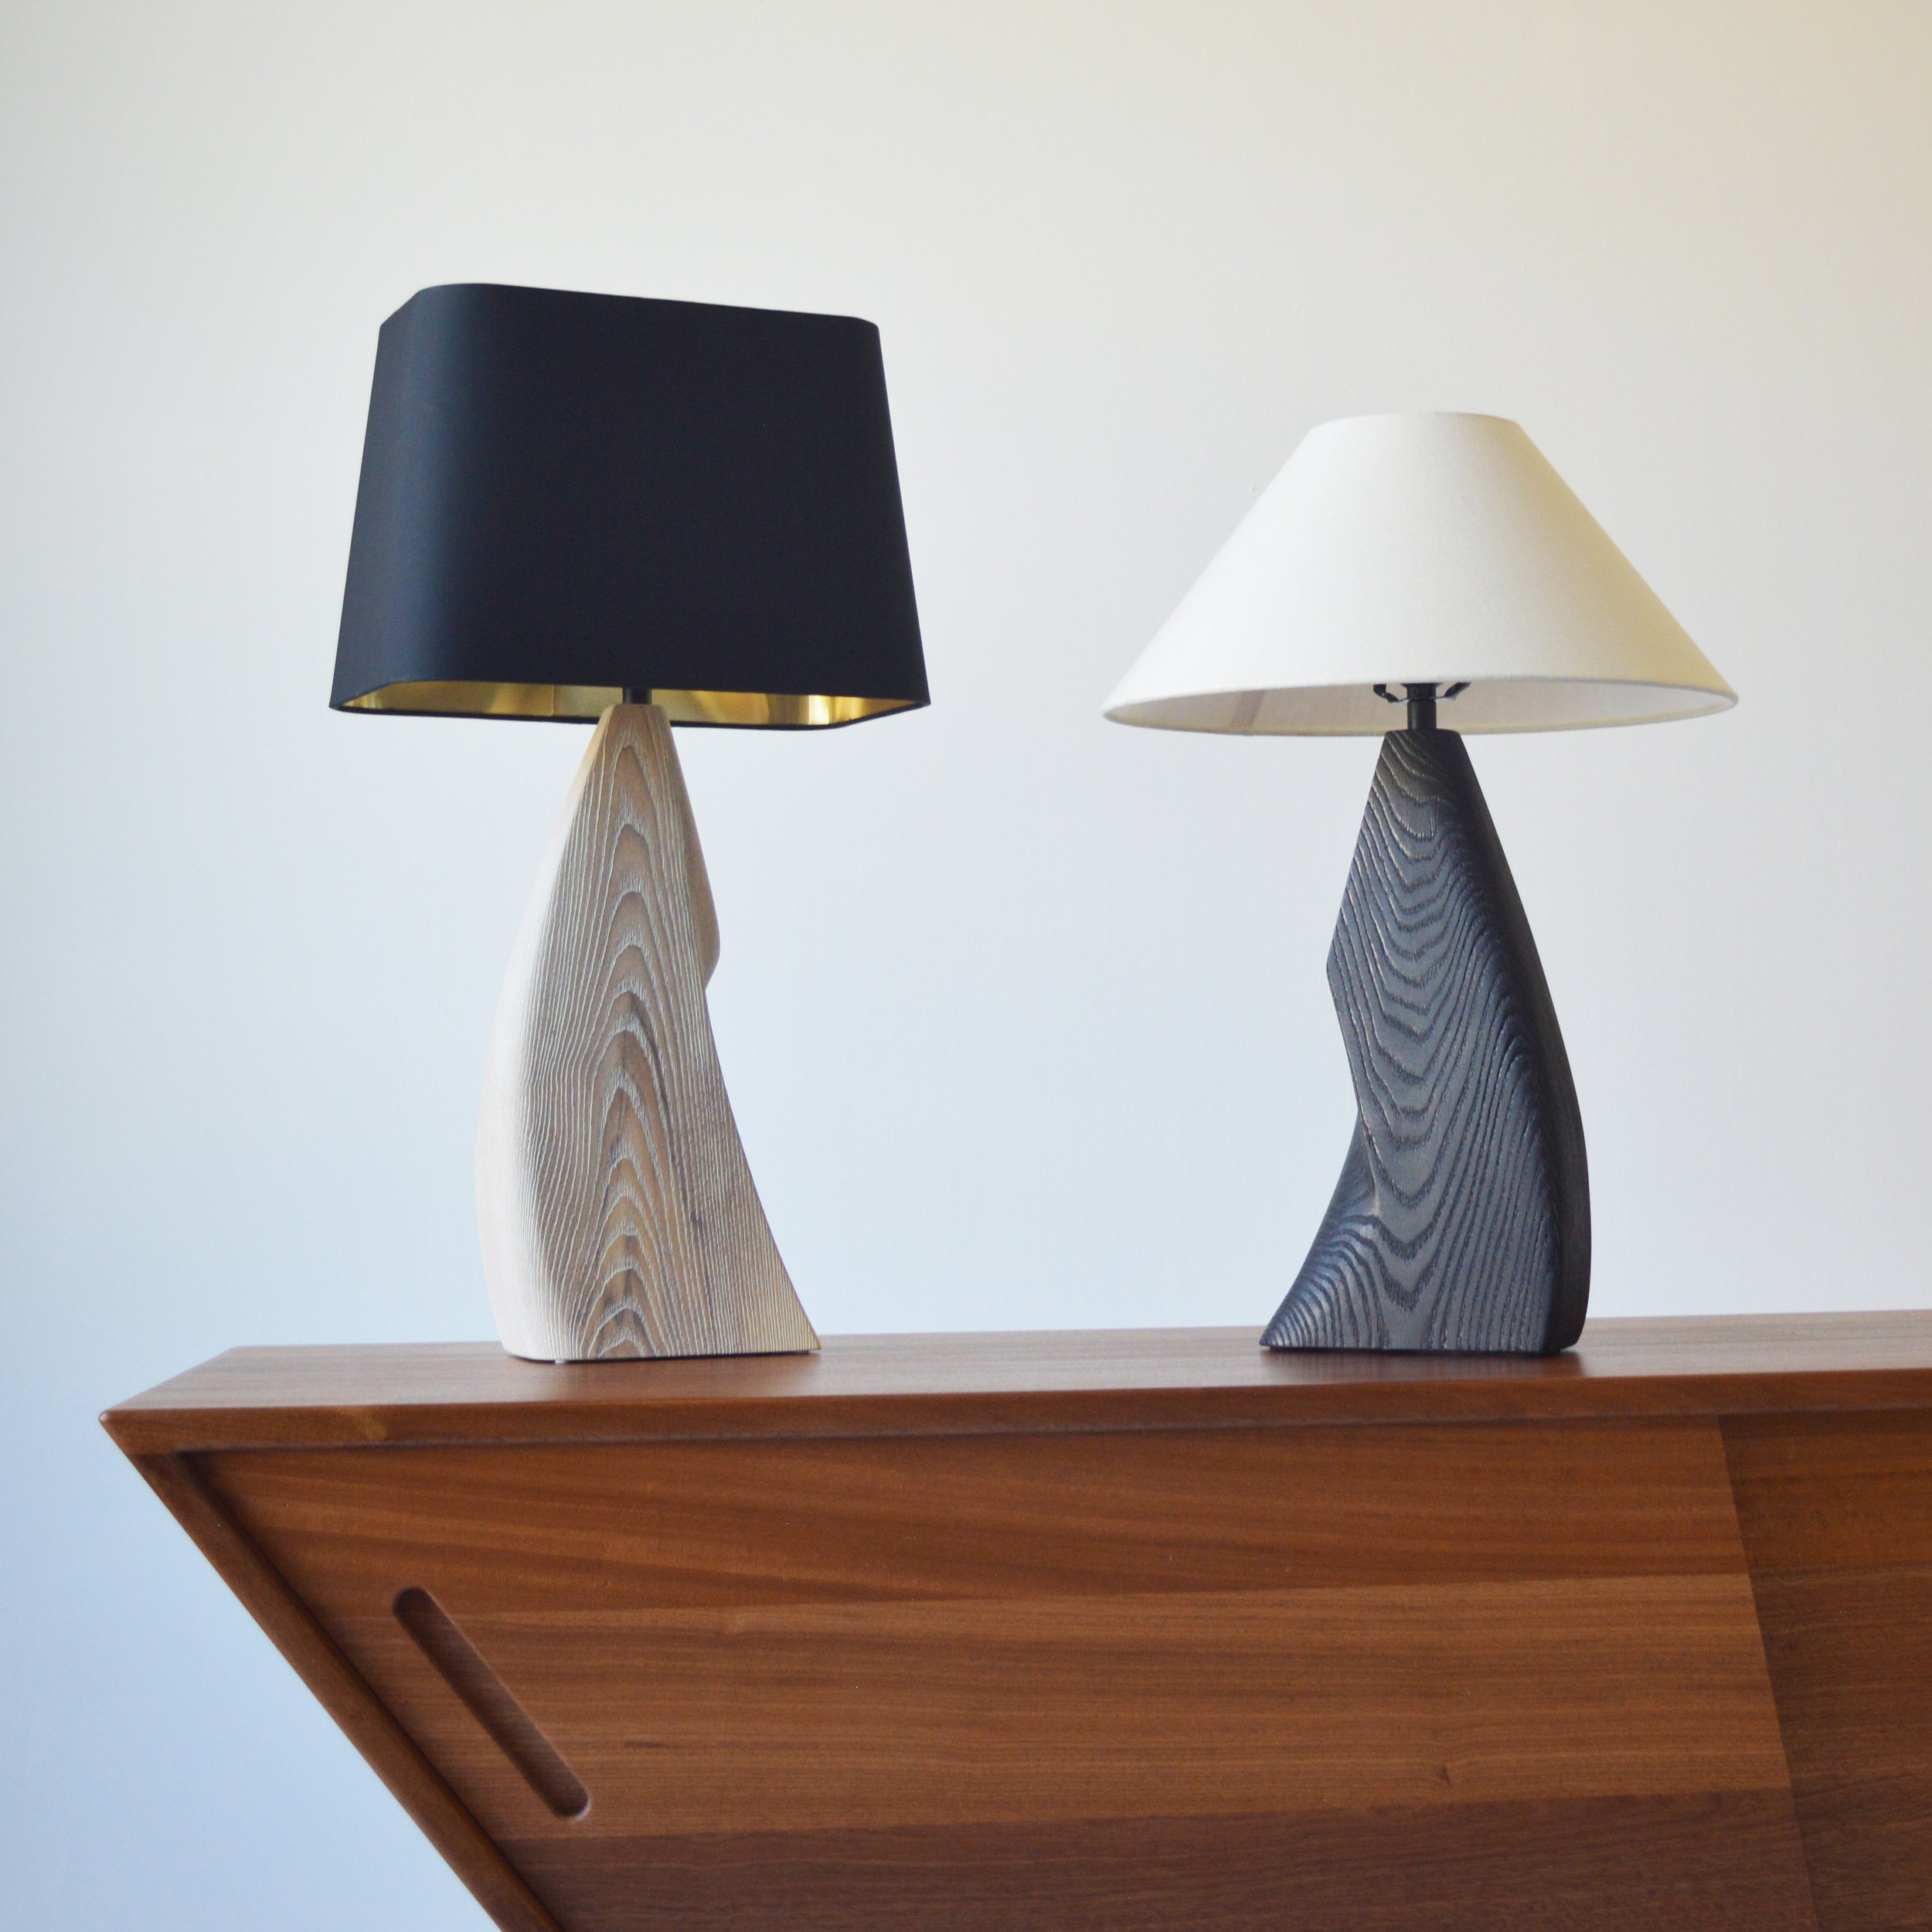 B&W Lamps on Credenza.jpg